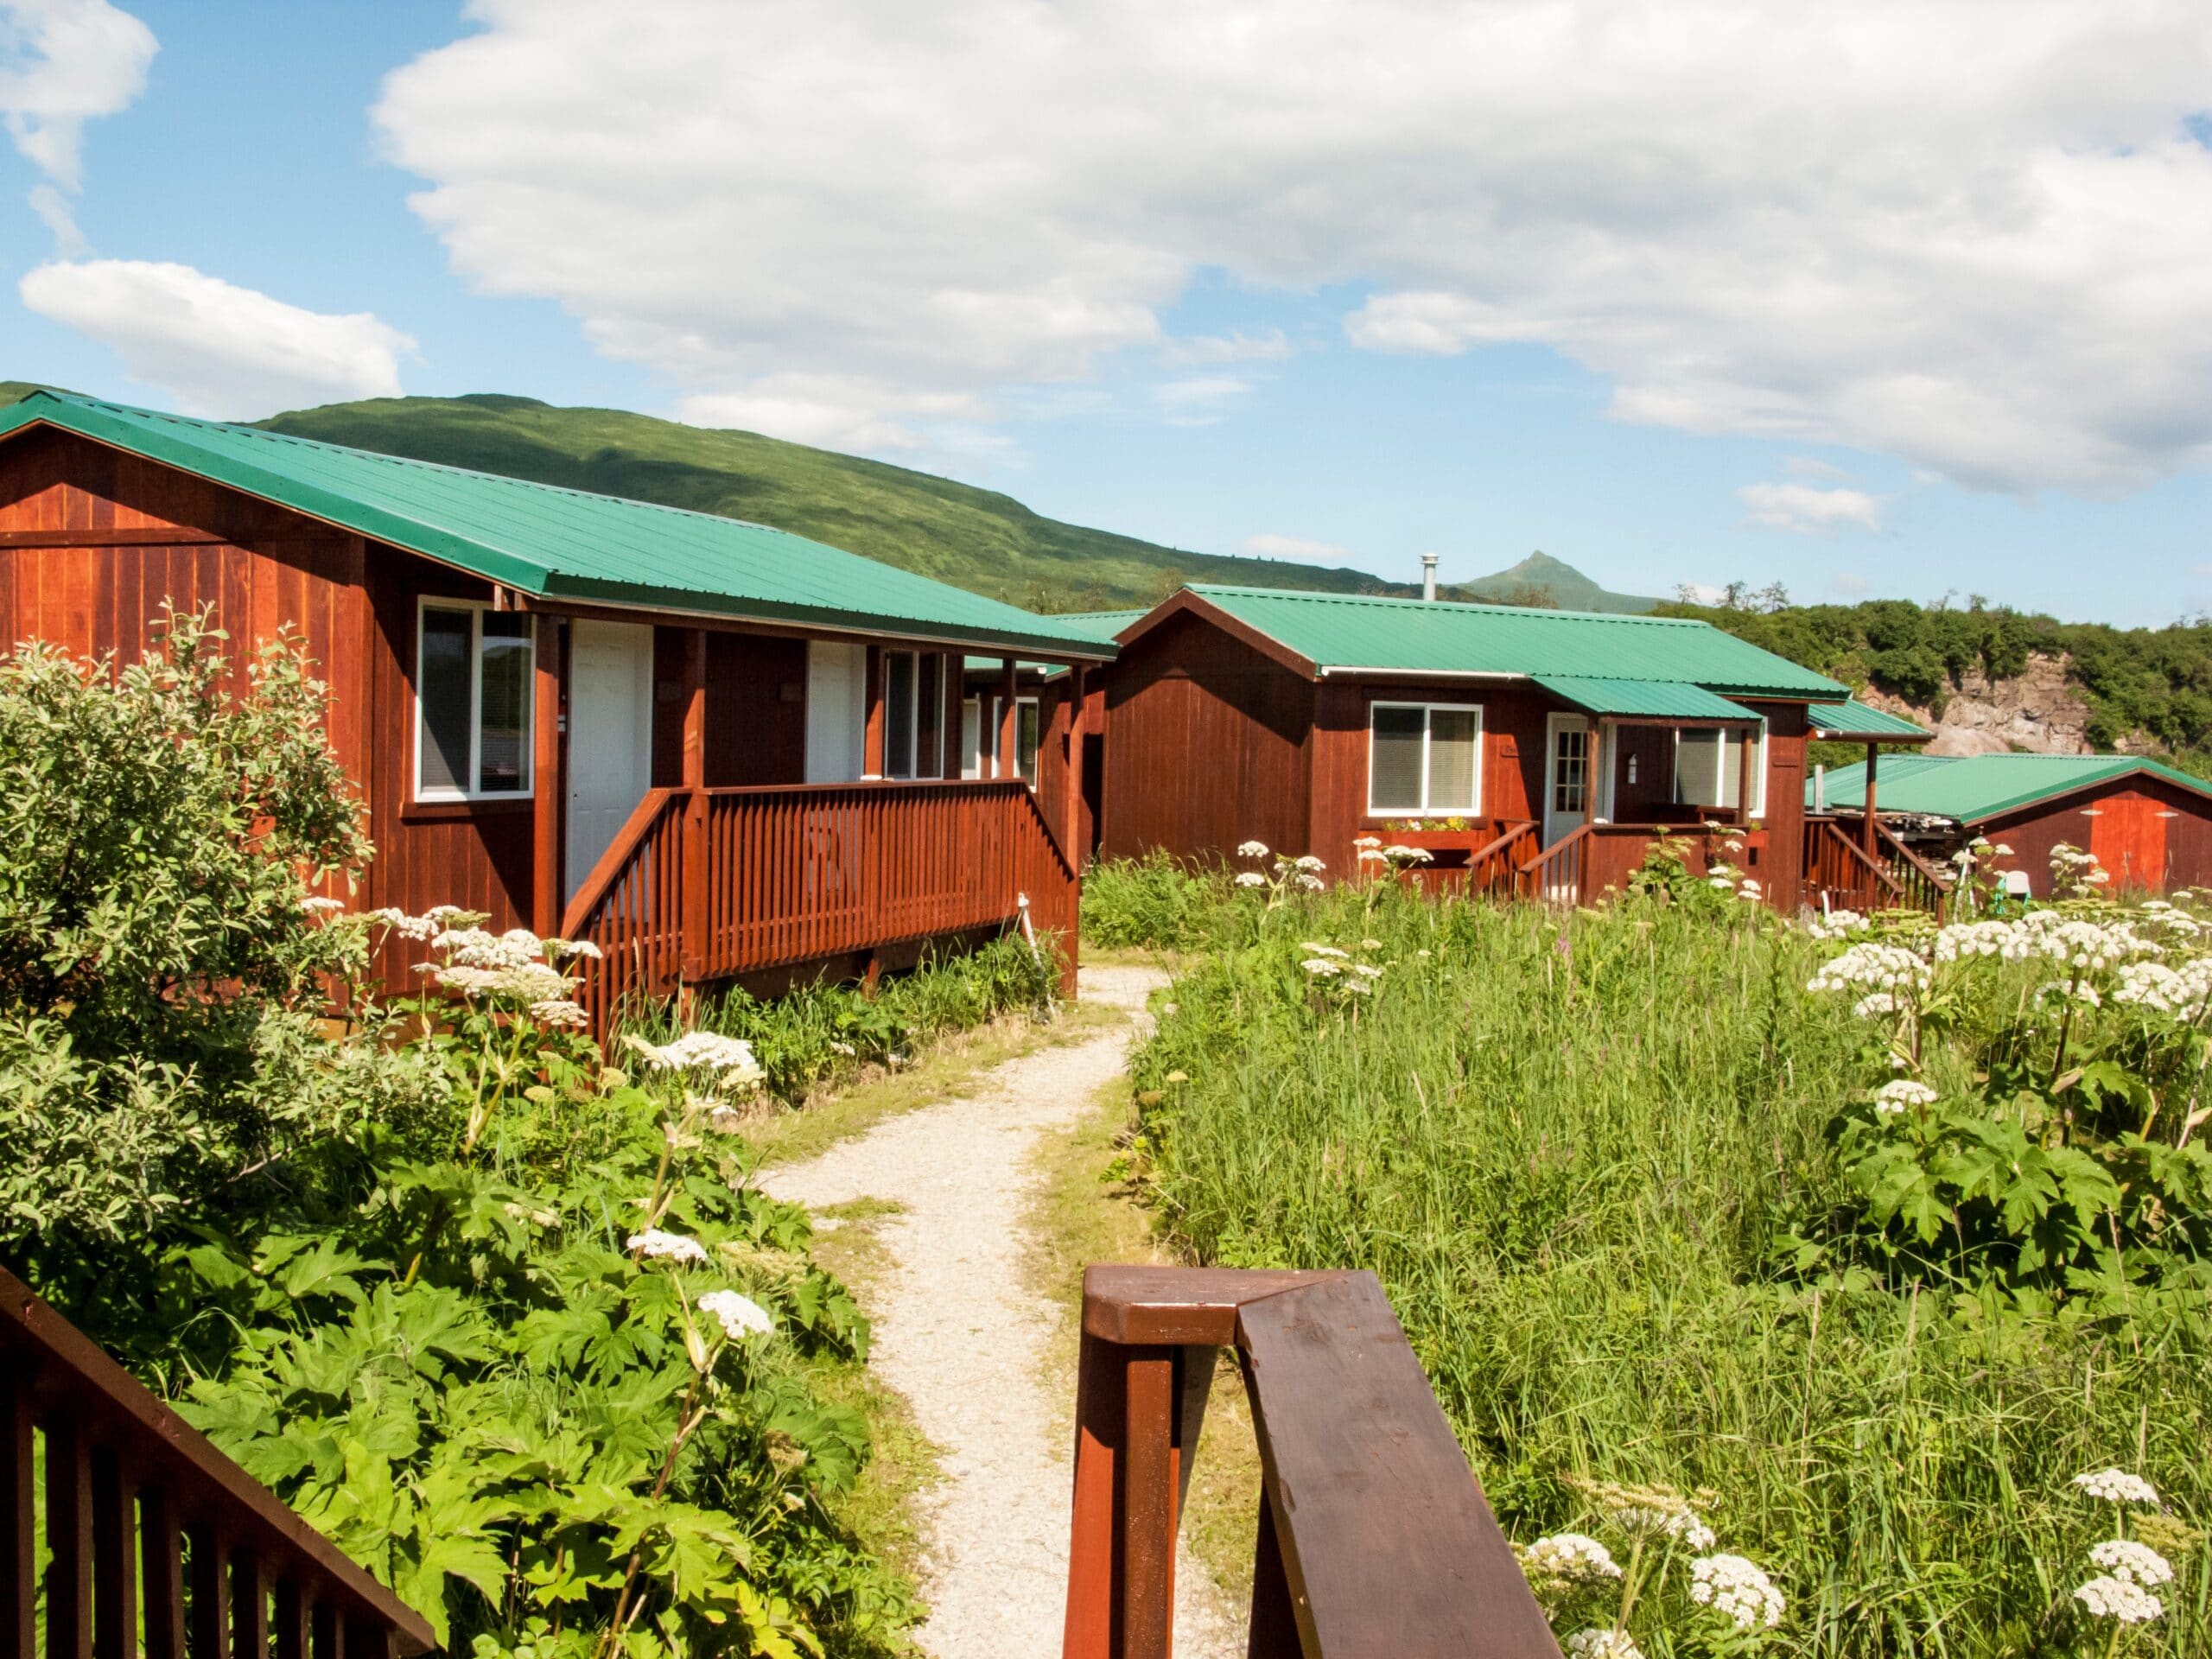 a path along some cabins red with green roof